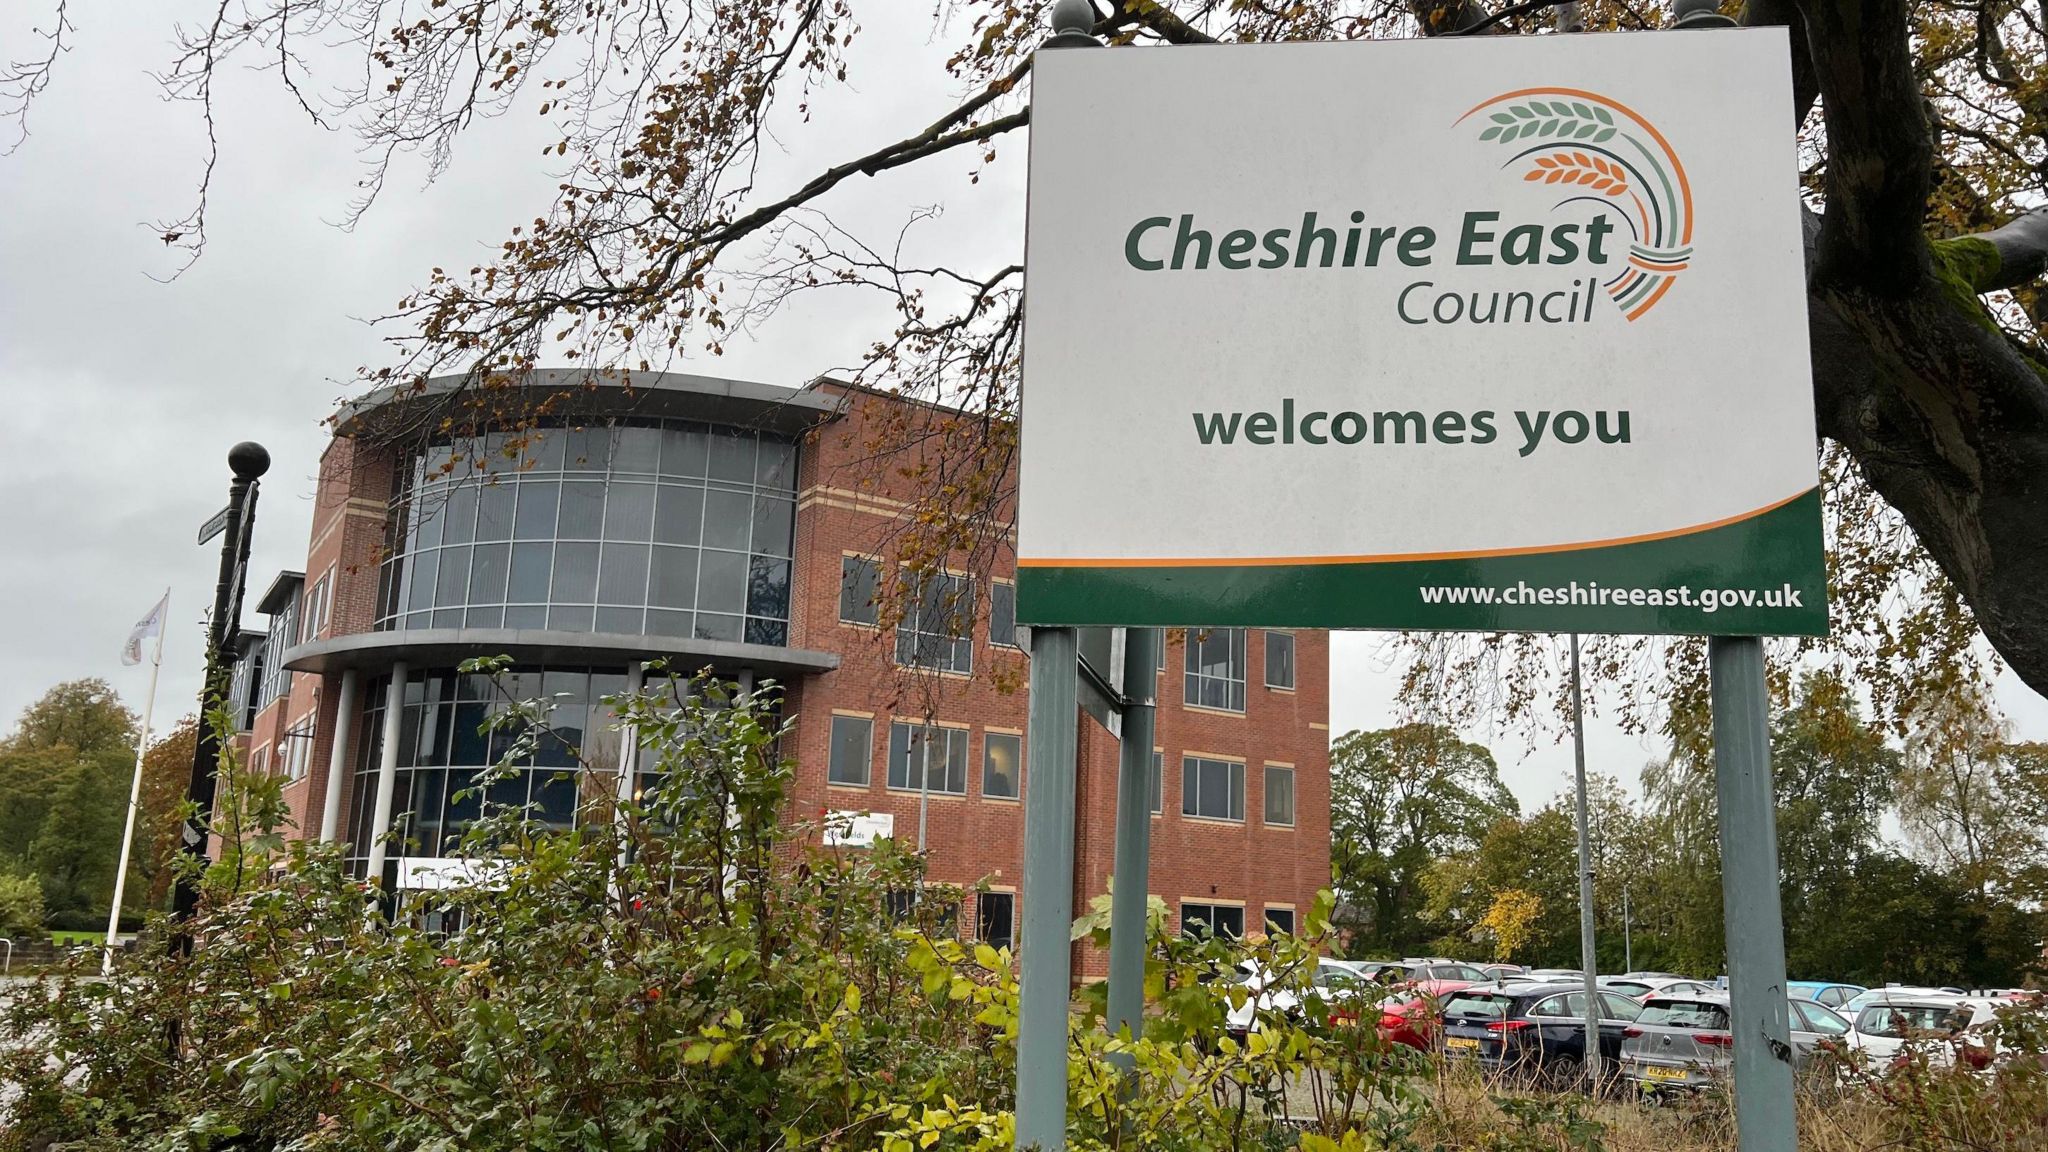 Cheshire East Council headquarters at Westfields in Sandbach